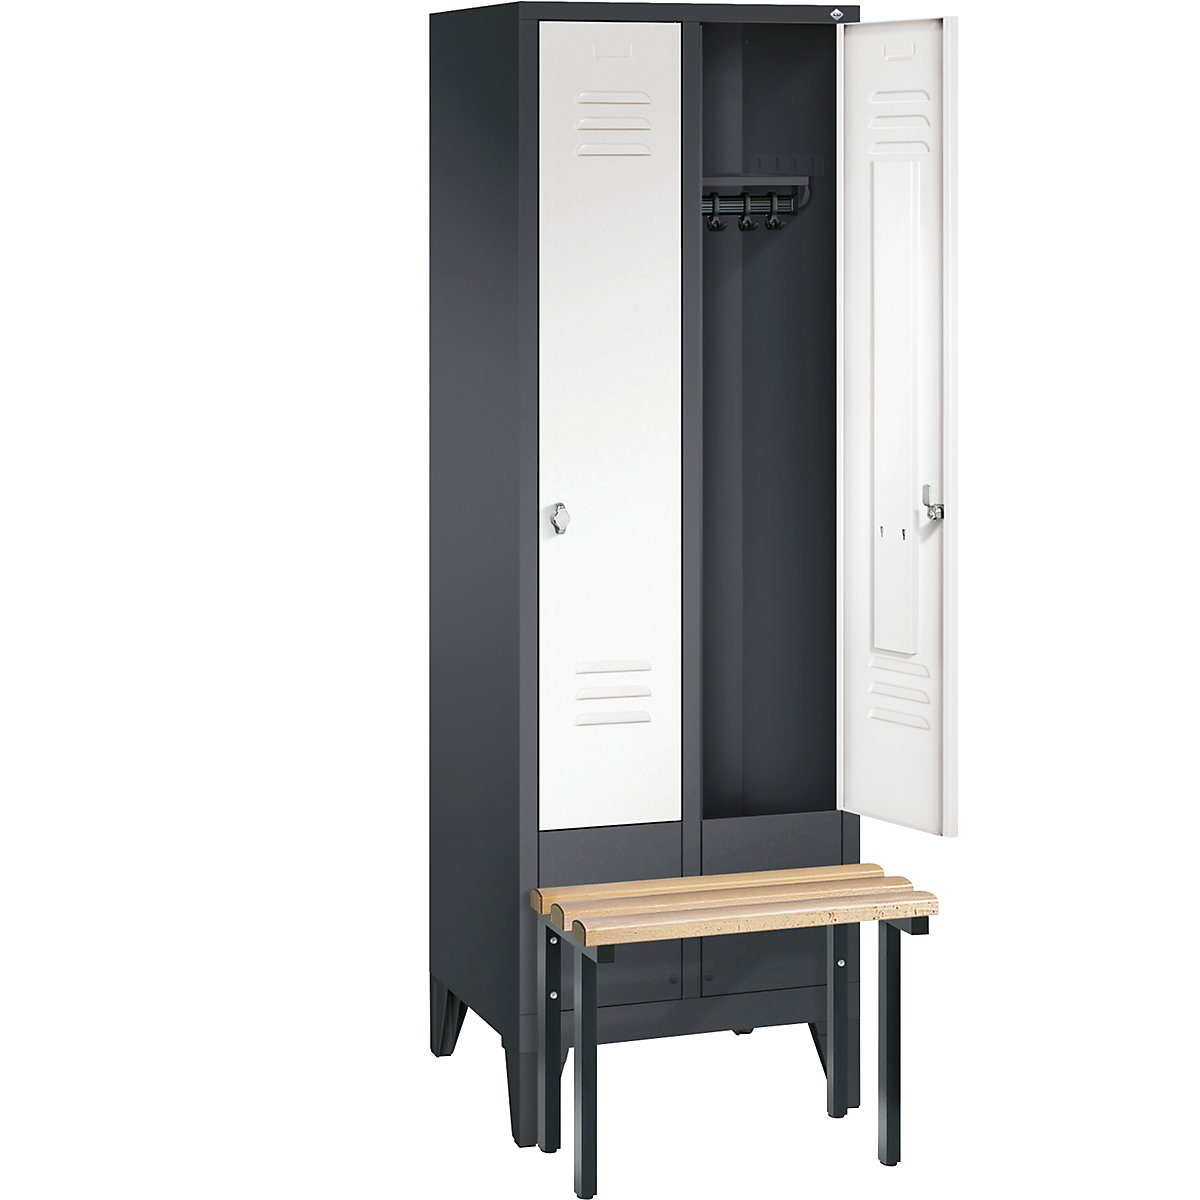 CLASSIC cloakroom locker with bench mounted in front – C+P (Product illustration 22)-21